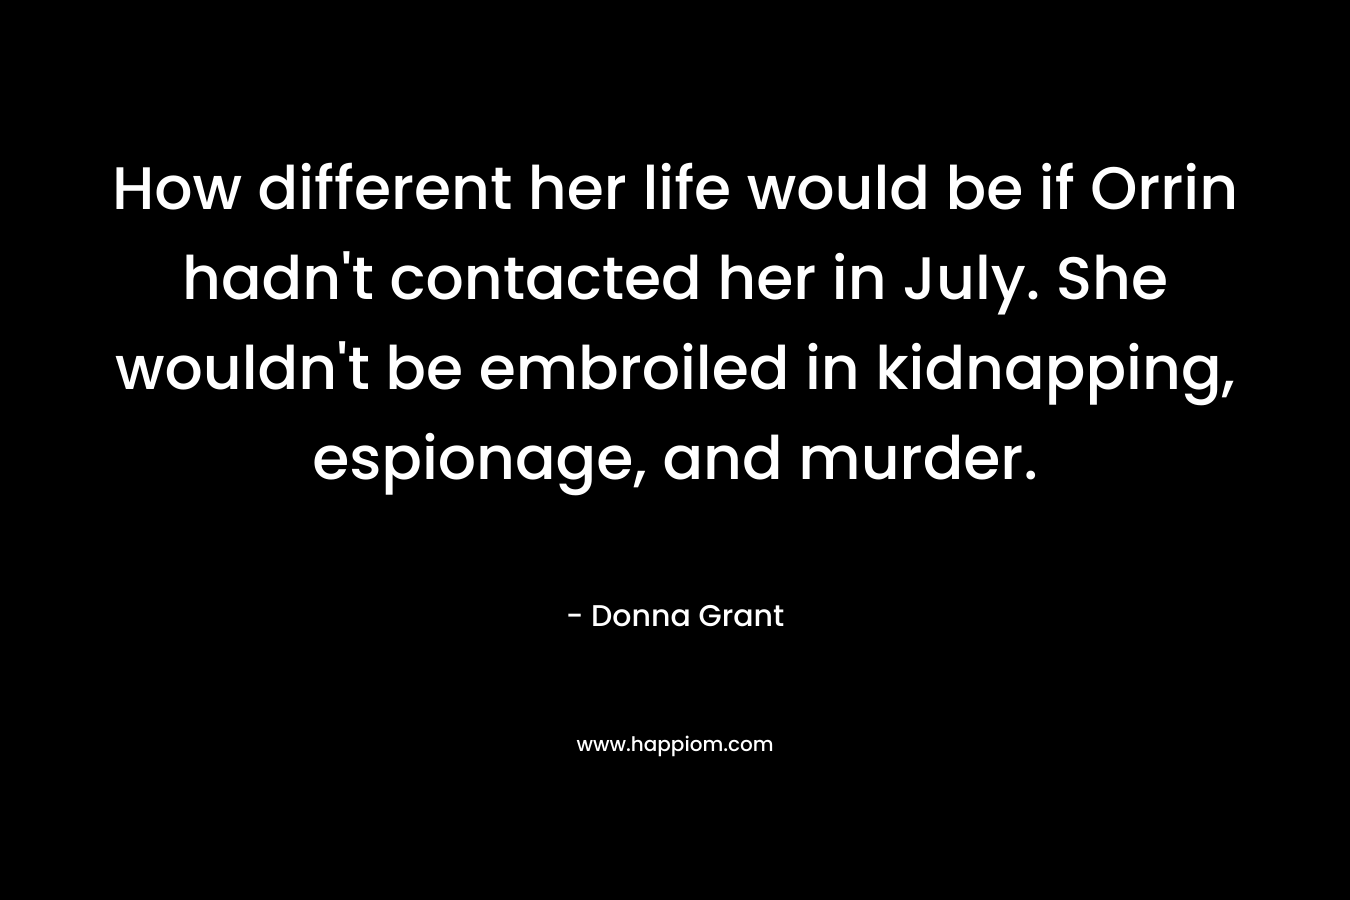 How different her life would be if Orrin hadn’t contacted her in July. She wouldn’t be embroiled in kidnapping, espionage, and murder. – Donna Grant